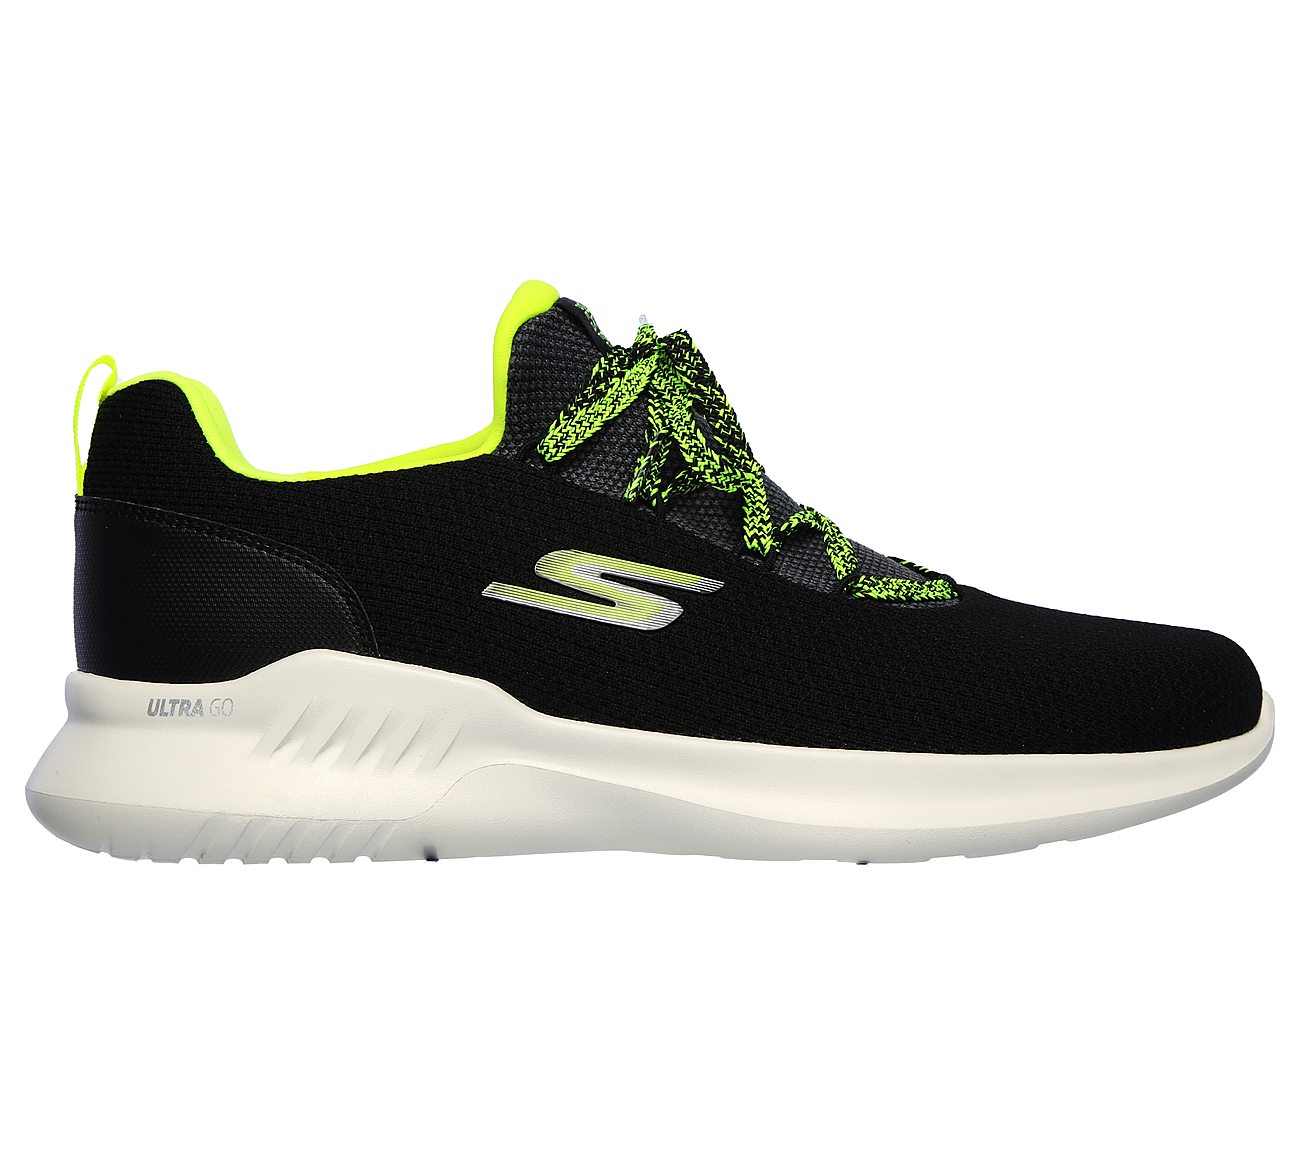 GO RUN MOJO 2.0 - LUCITE, BLACK/LIME Footwear Right View